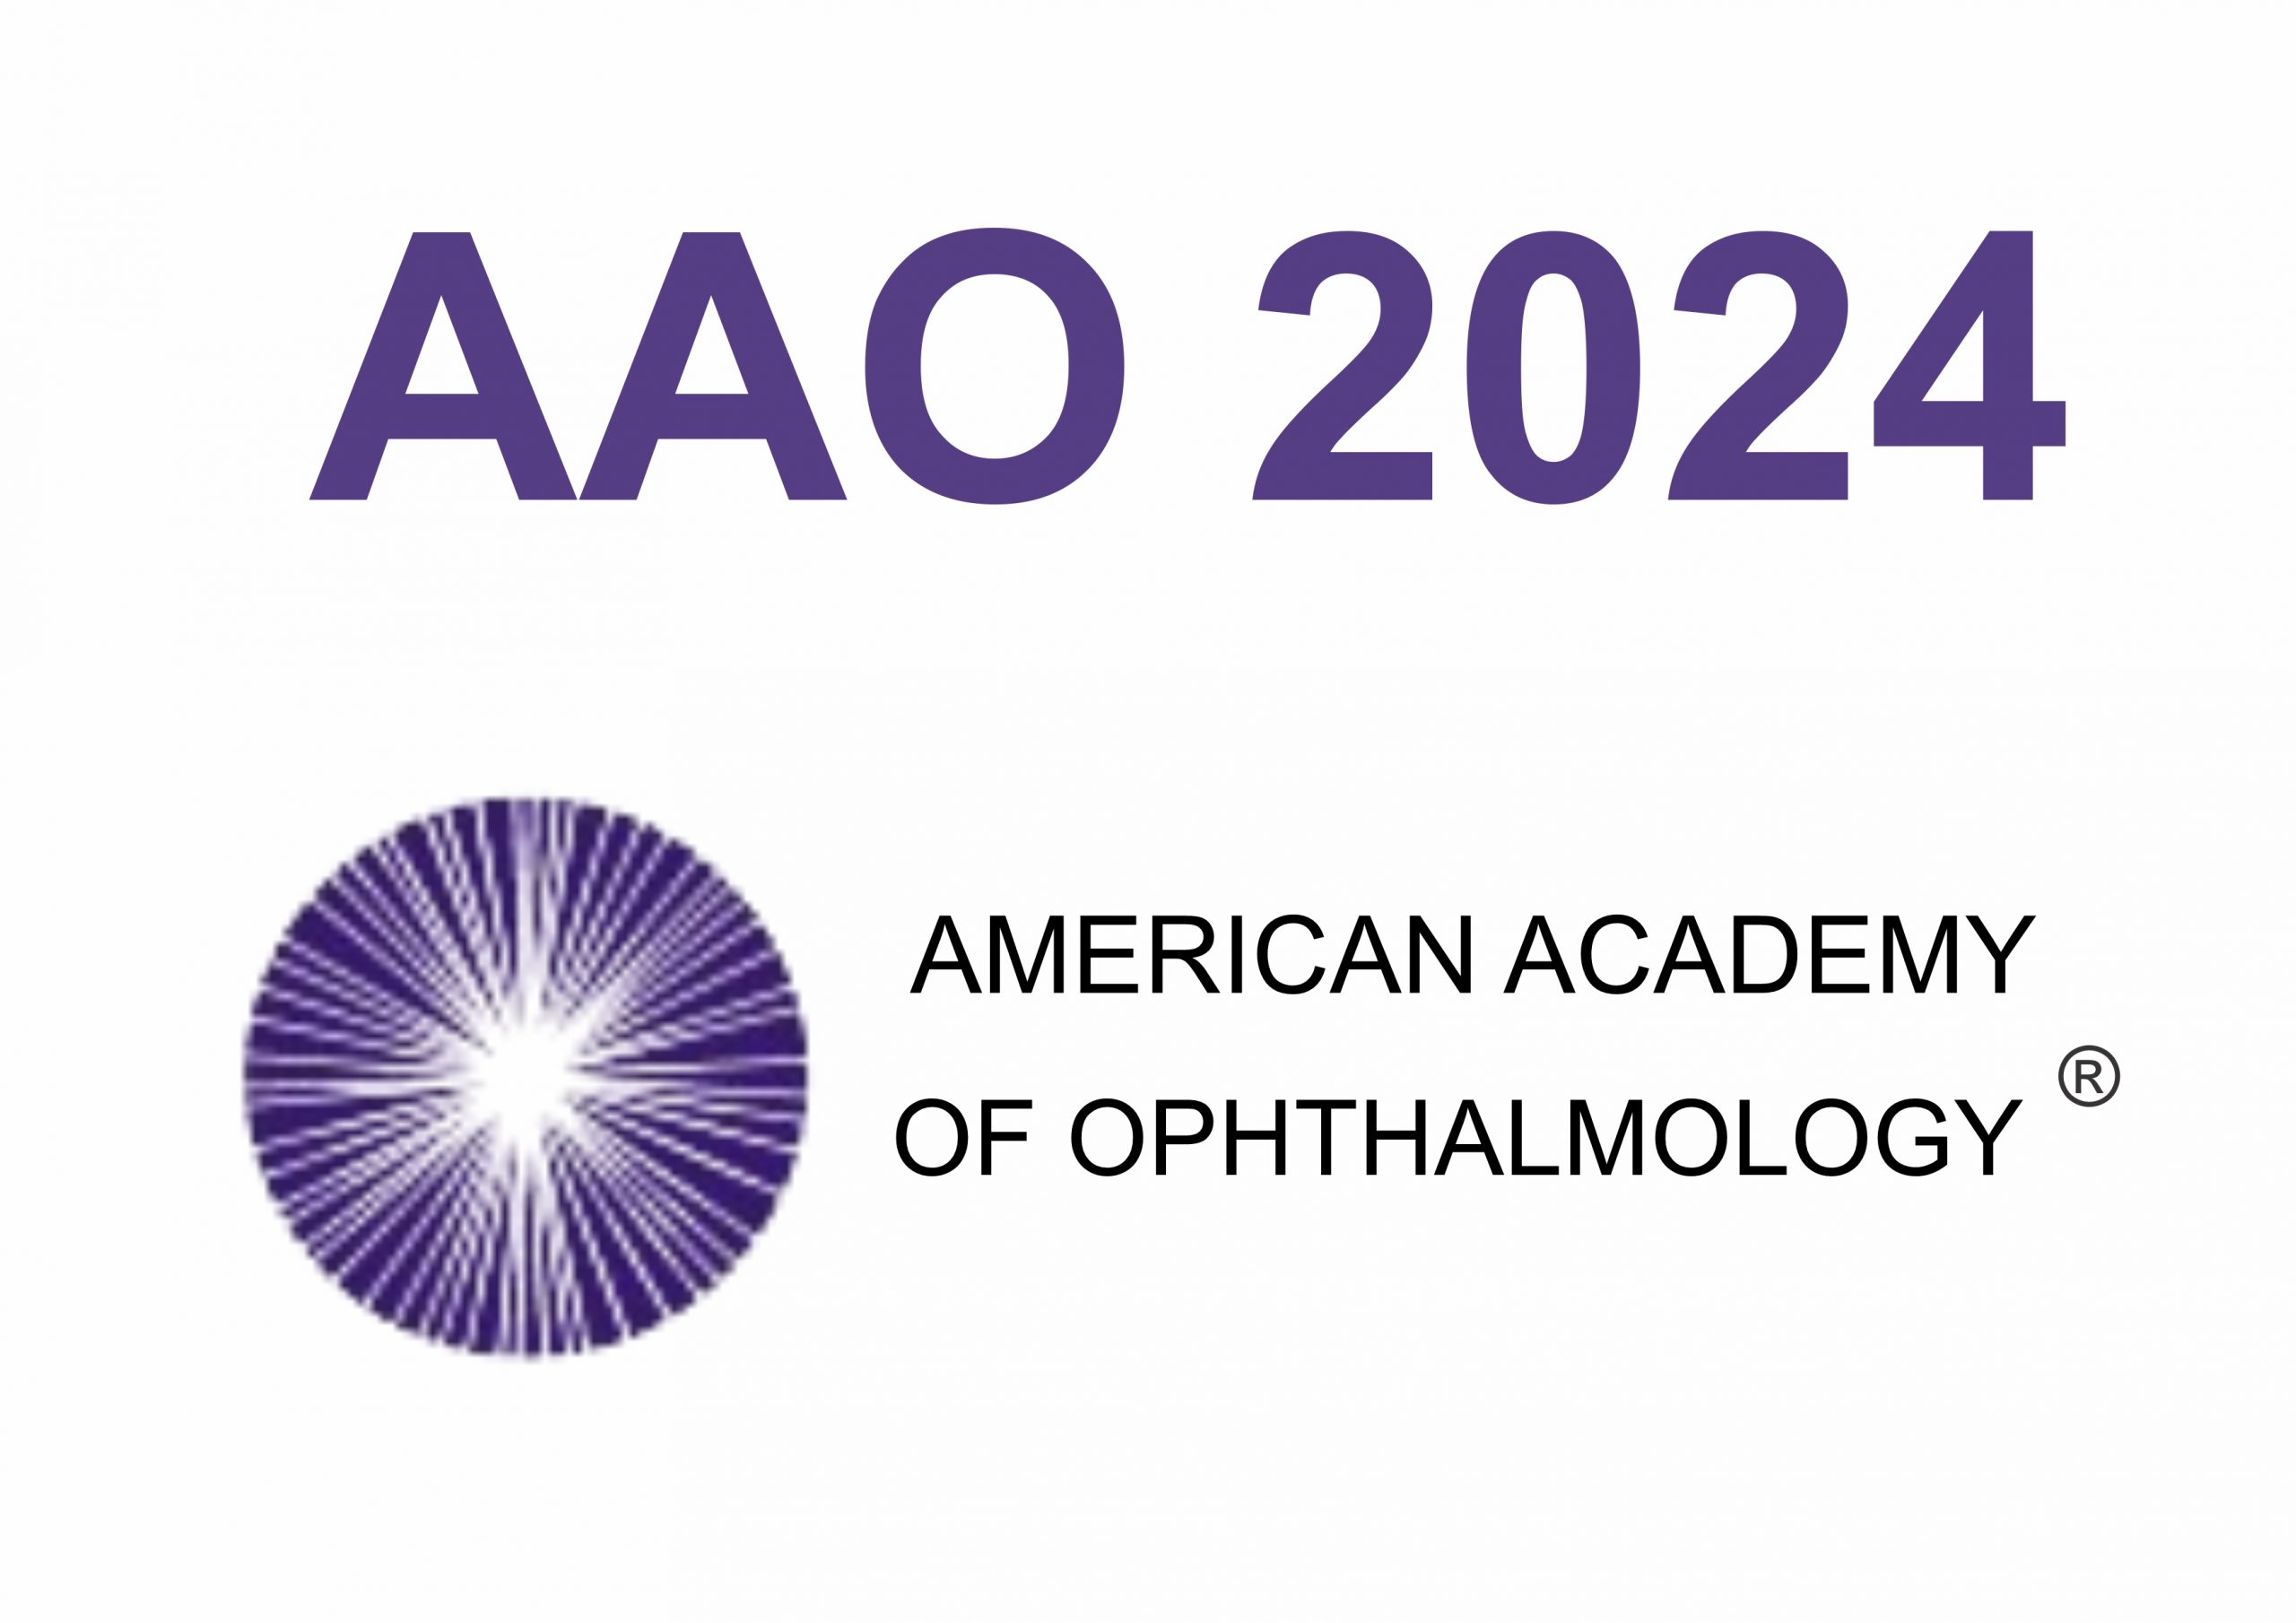 American Academy of Ophthalmology conference AAO 2024